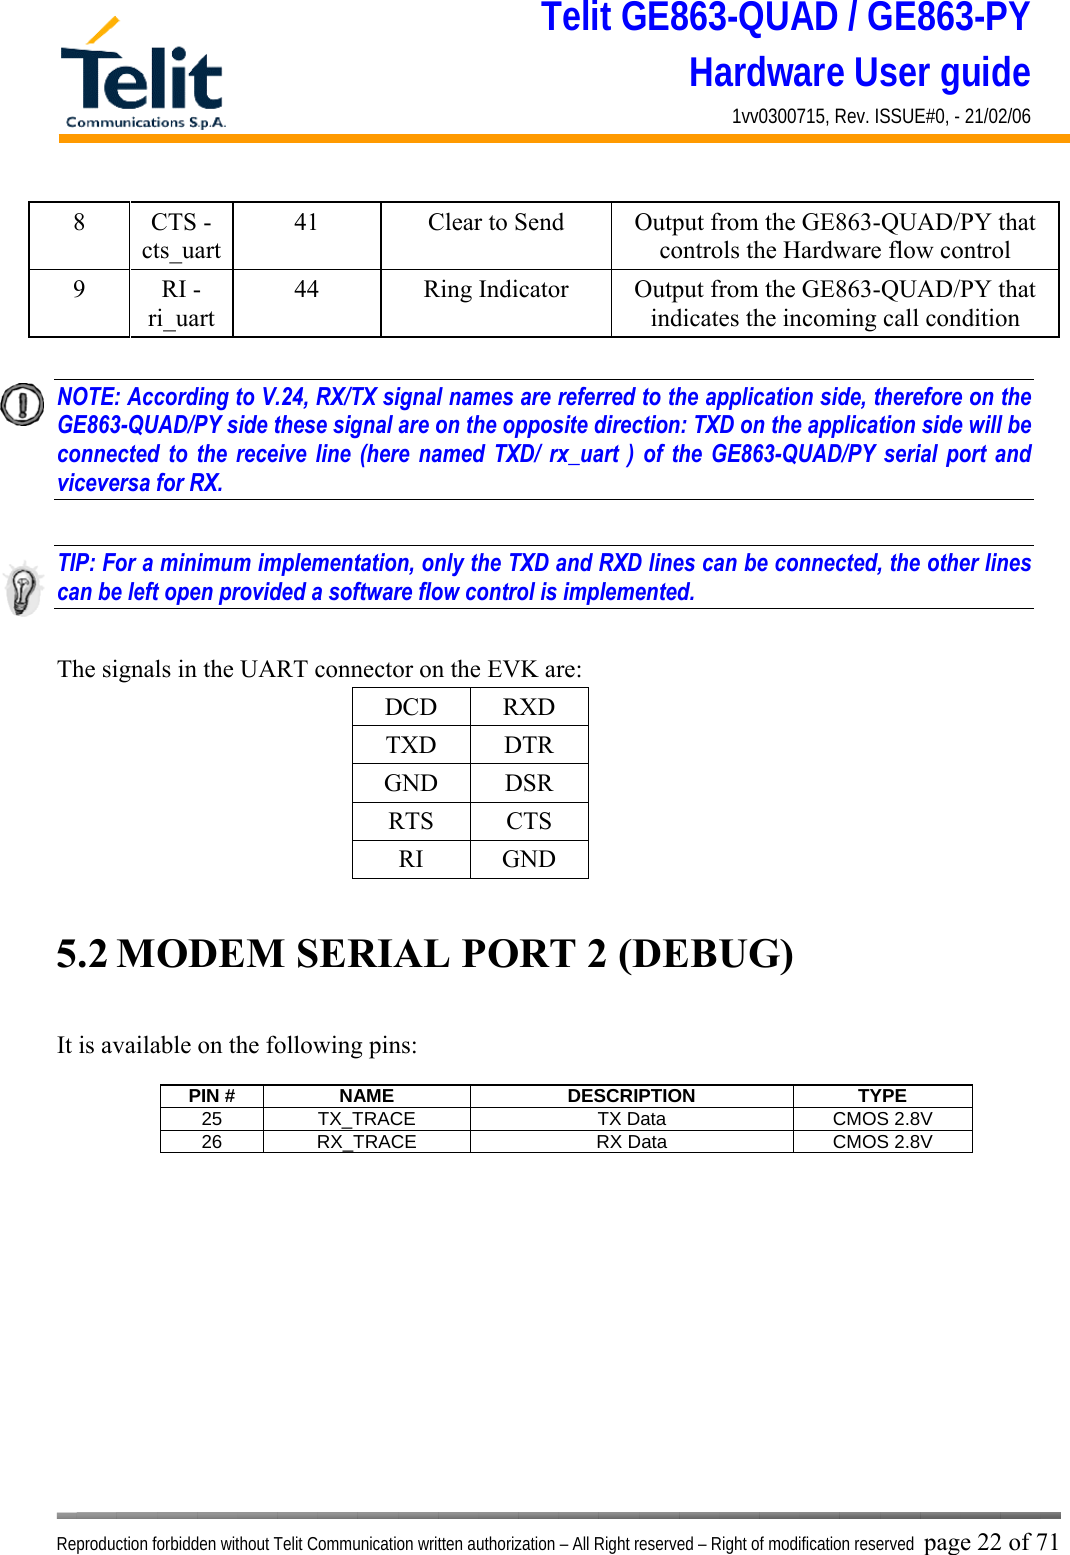 Telit GE863-QUAD / GE863-PY Hardware User guide 1vv0300715, Rev. ISSUE#0, - 21/02/06    Reproduction forbidden without Telit Communication written authorization – All Right reserved – Right of modification reserved page 22 of 71 8 CTS - cts_uart 41  Clear to Send  Output from the GE863-QUAD/PY that controls the Hardware flow control 9 RI - ri_uart 44  Ring Indicator  Output from the GE863-QUAD/PY that indicates the incoming call condition  NOTE: According to V.24, RX/TX signal names are referred to the application side, therefore on the GE863-QUAD/PY side these signal are on the opposite direction: TXD on the application side will be connected to the receive line (here named TXD/ rx_uart ) of the GE863-QUAD/PY serial port and viceversa for RX.  TIP: For a minimum implementation, only the TXD and RXD lines can be connected, the other lines can be left open provided a software flow control is implemented.  The signals in the UART connector on the EVK are: DCD RXD TXD DTR GND DSR RTS CTS RI GND  5.2 MODEM SERIAL PORT 2 (DEBUG)  It is available on the following pins:  PIN #  NAME  DESCRIPTION  TYPE 25  TX_TRACE  TX Data   CMOS 2.8V 26  RX_TRACE  RX Data   CMOS 2.8V  